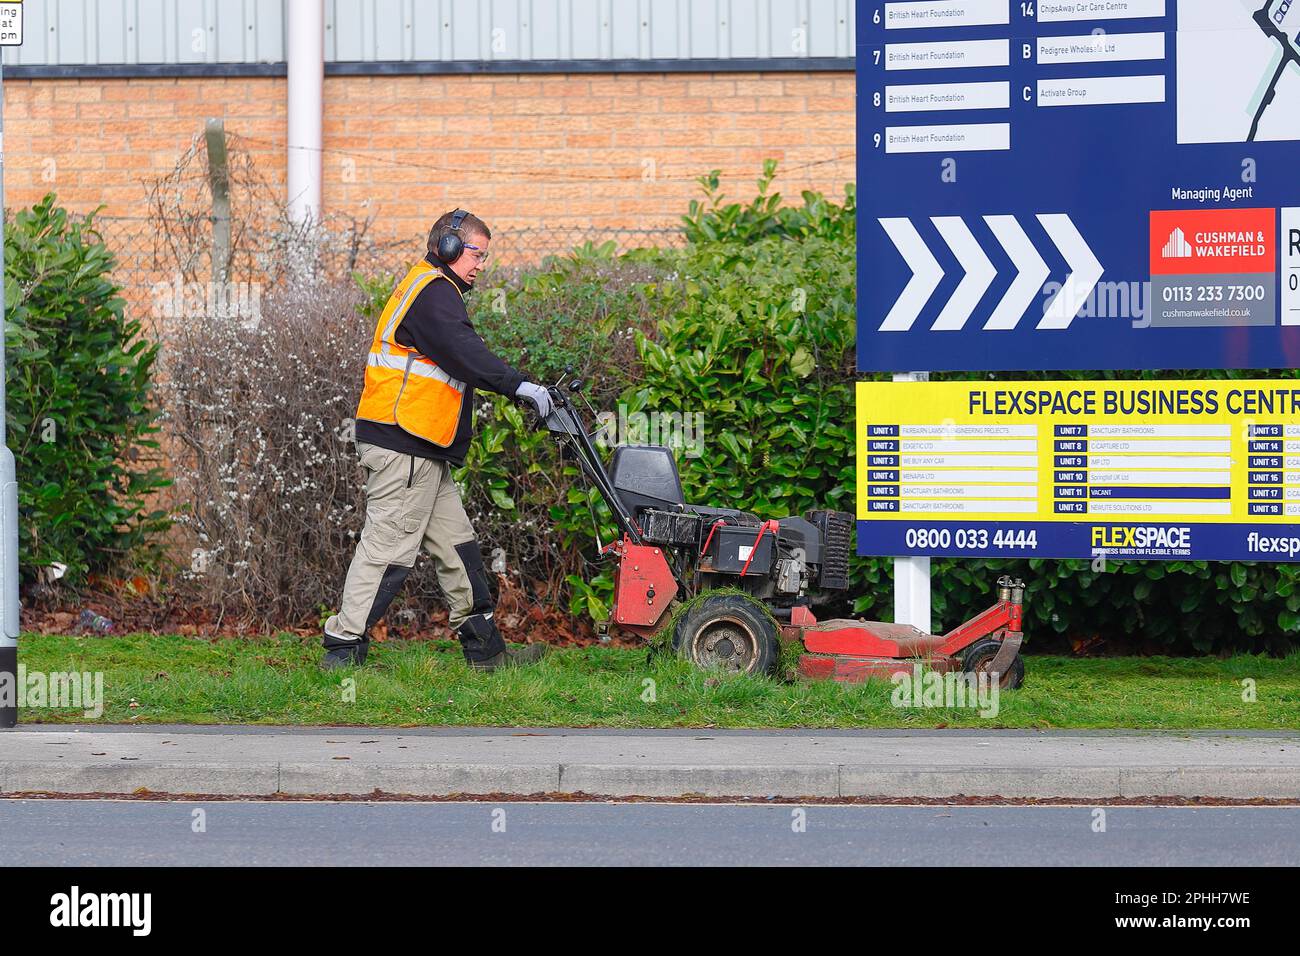 A gardener using a petrol lawn mower to cut grass on road side verges in an industrial estate in Leeds,West Yorkshire,UK Stock Photo